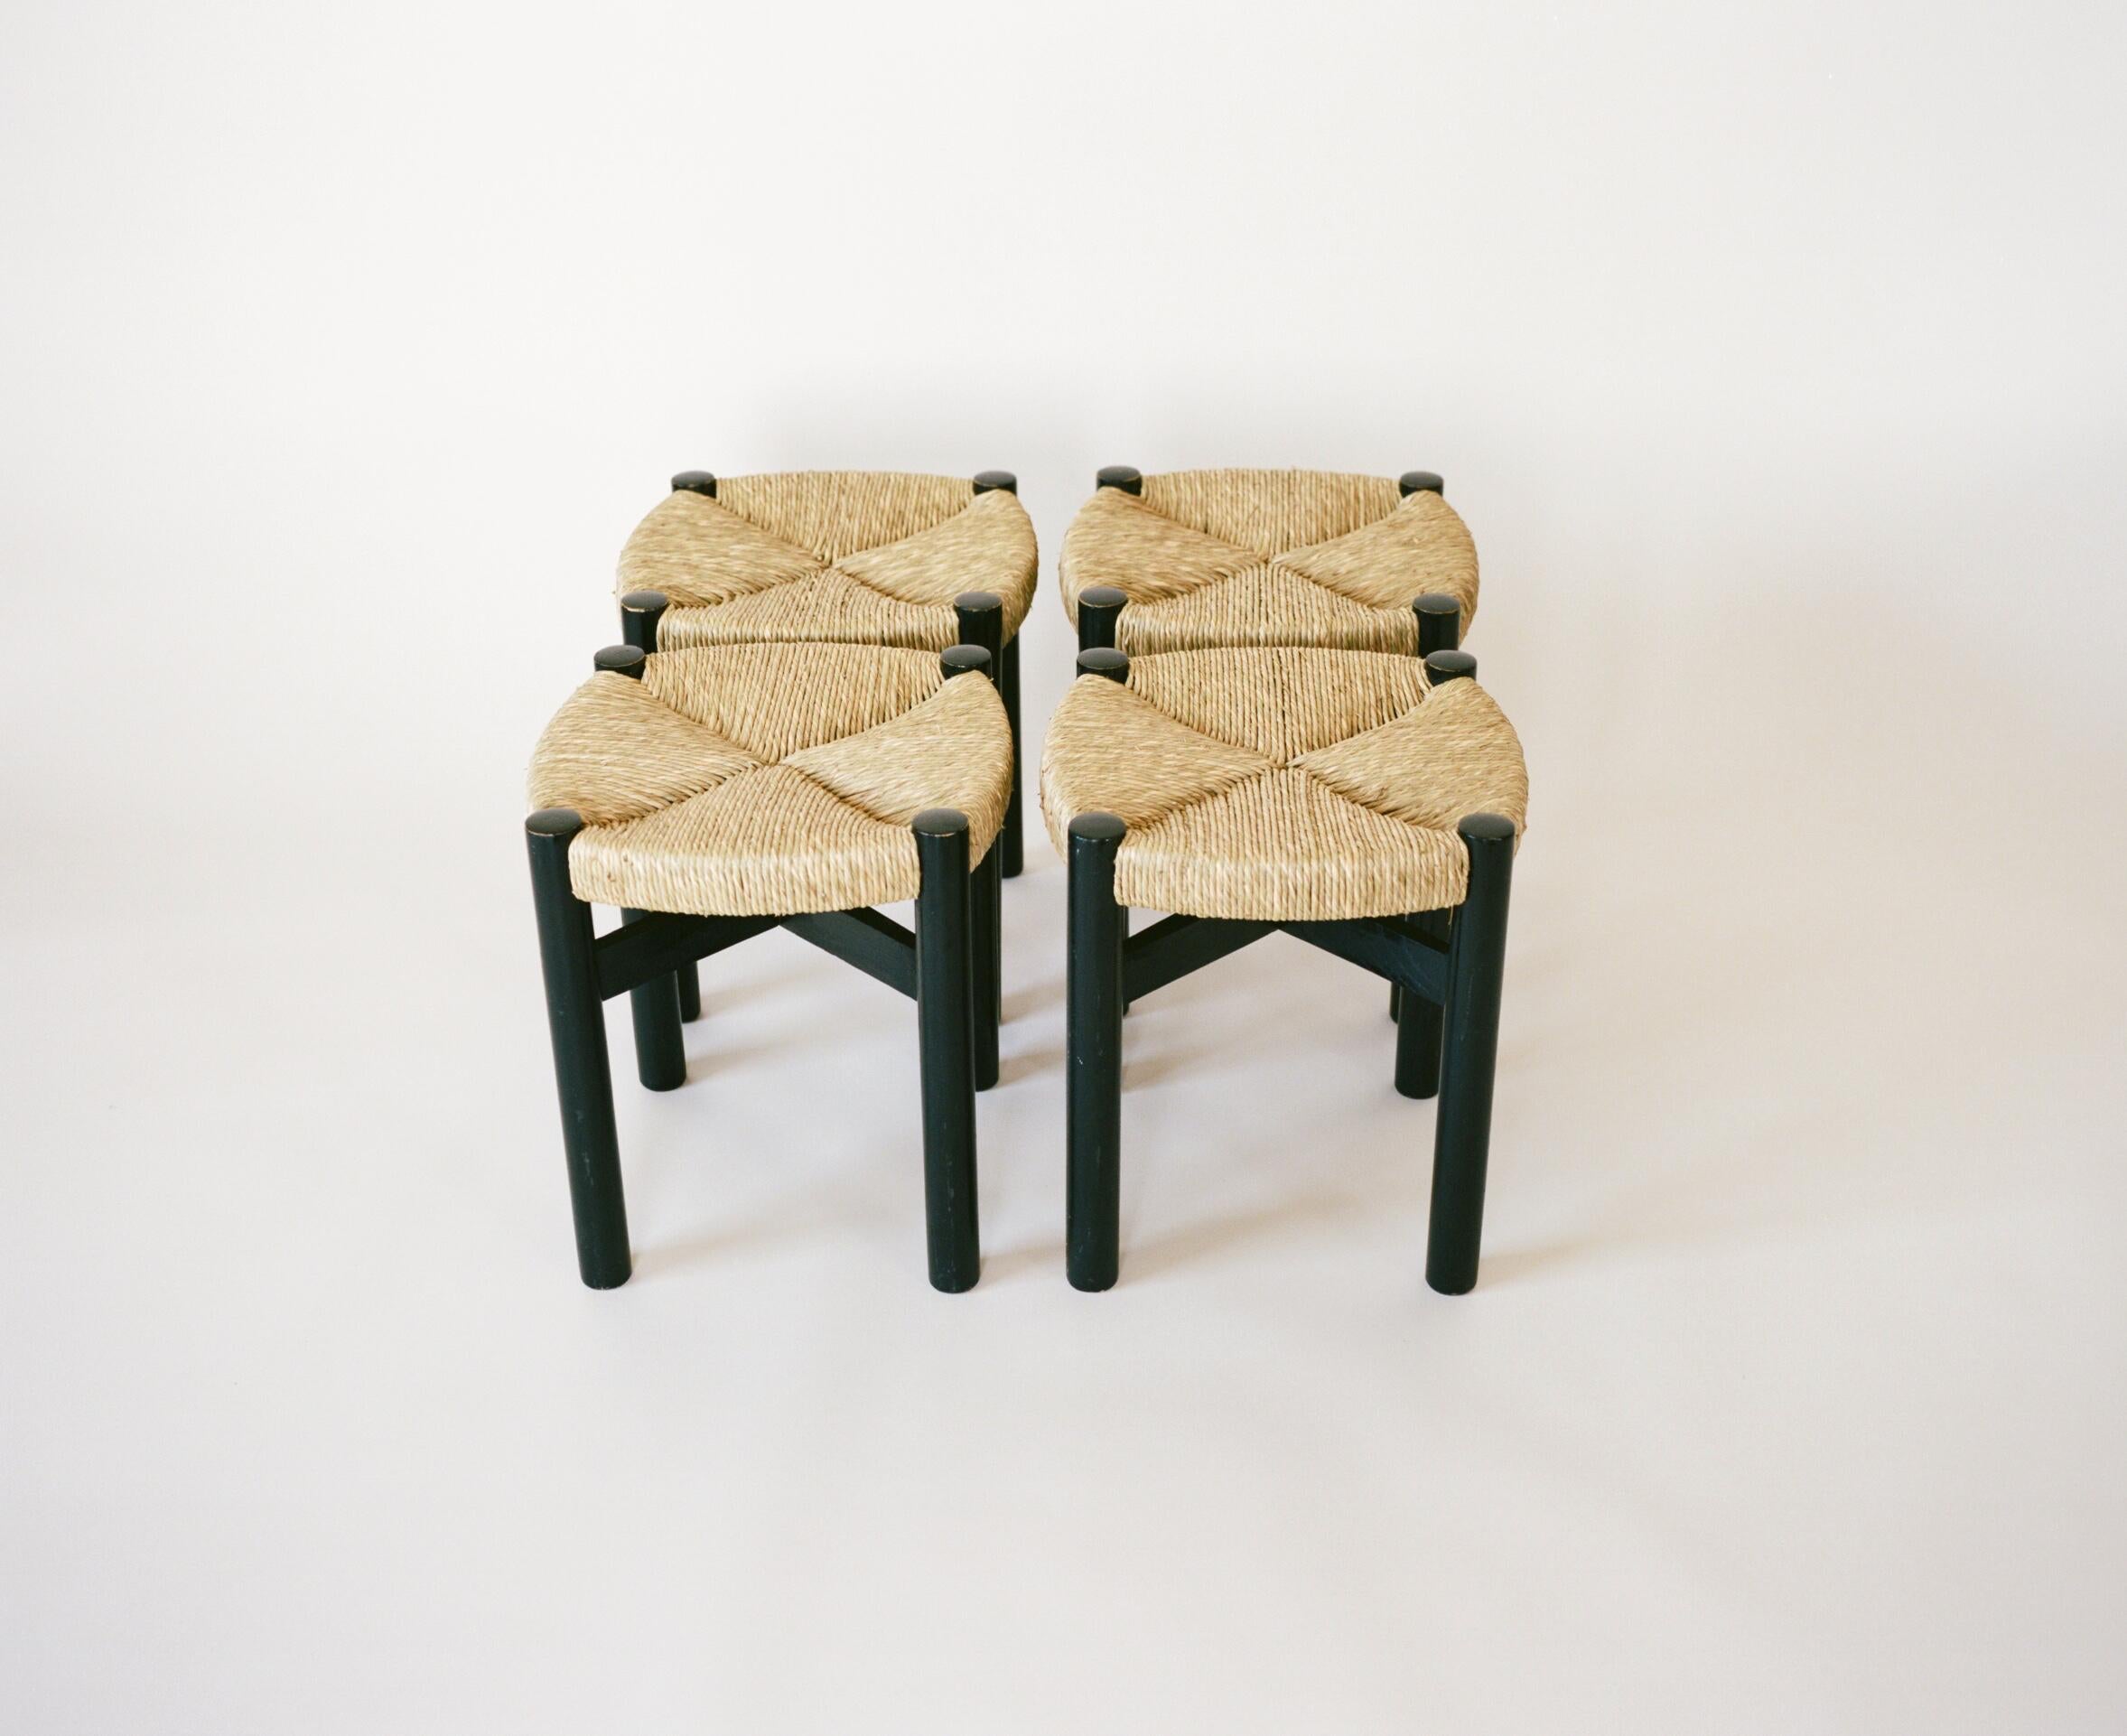 French Charlotte Perriand, Four Stools, circa 1948